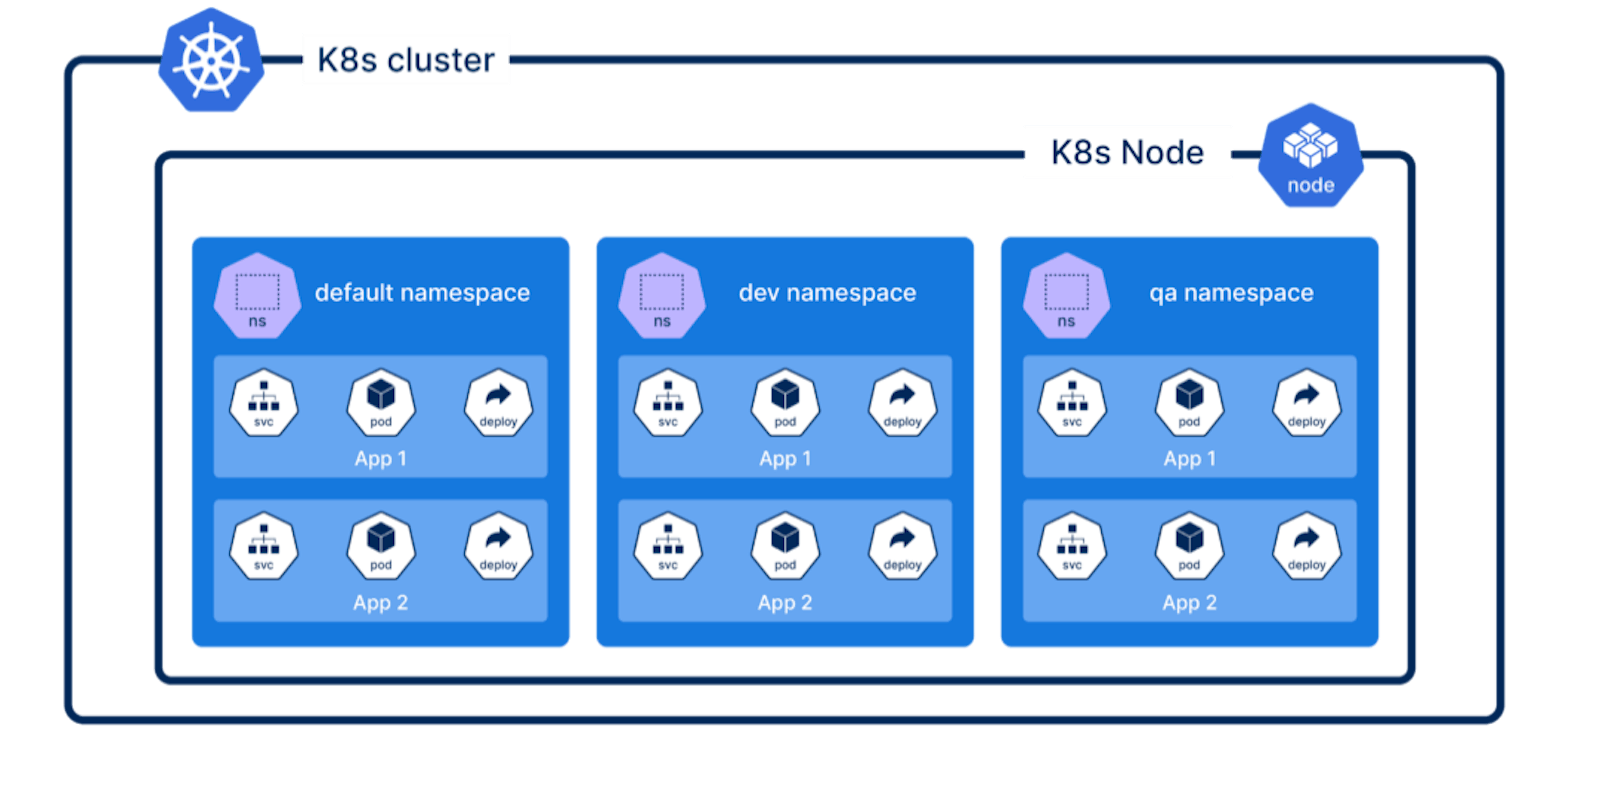 Working with Namespaces and Services in Kubernetes